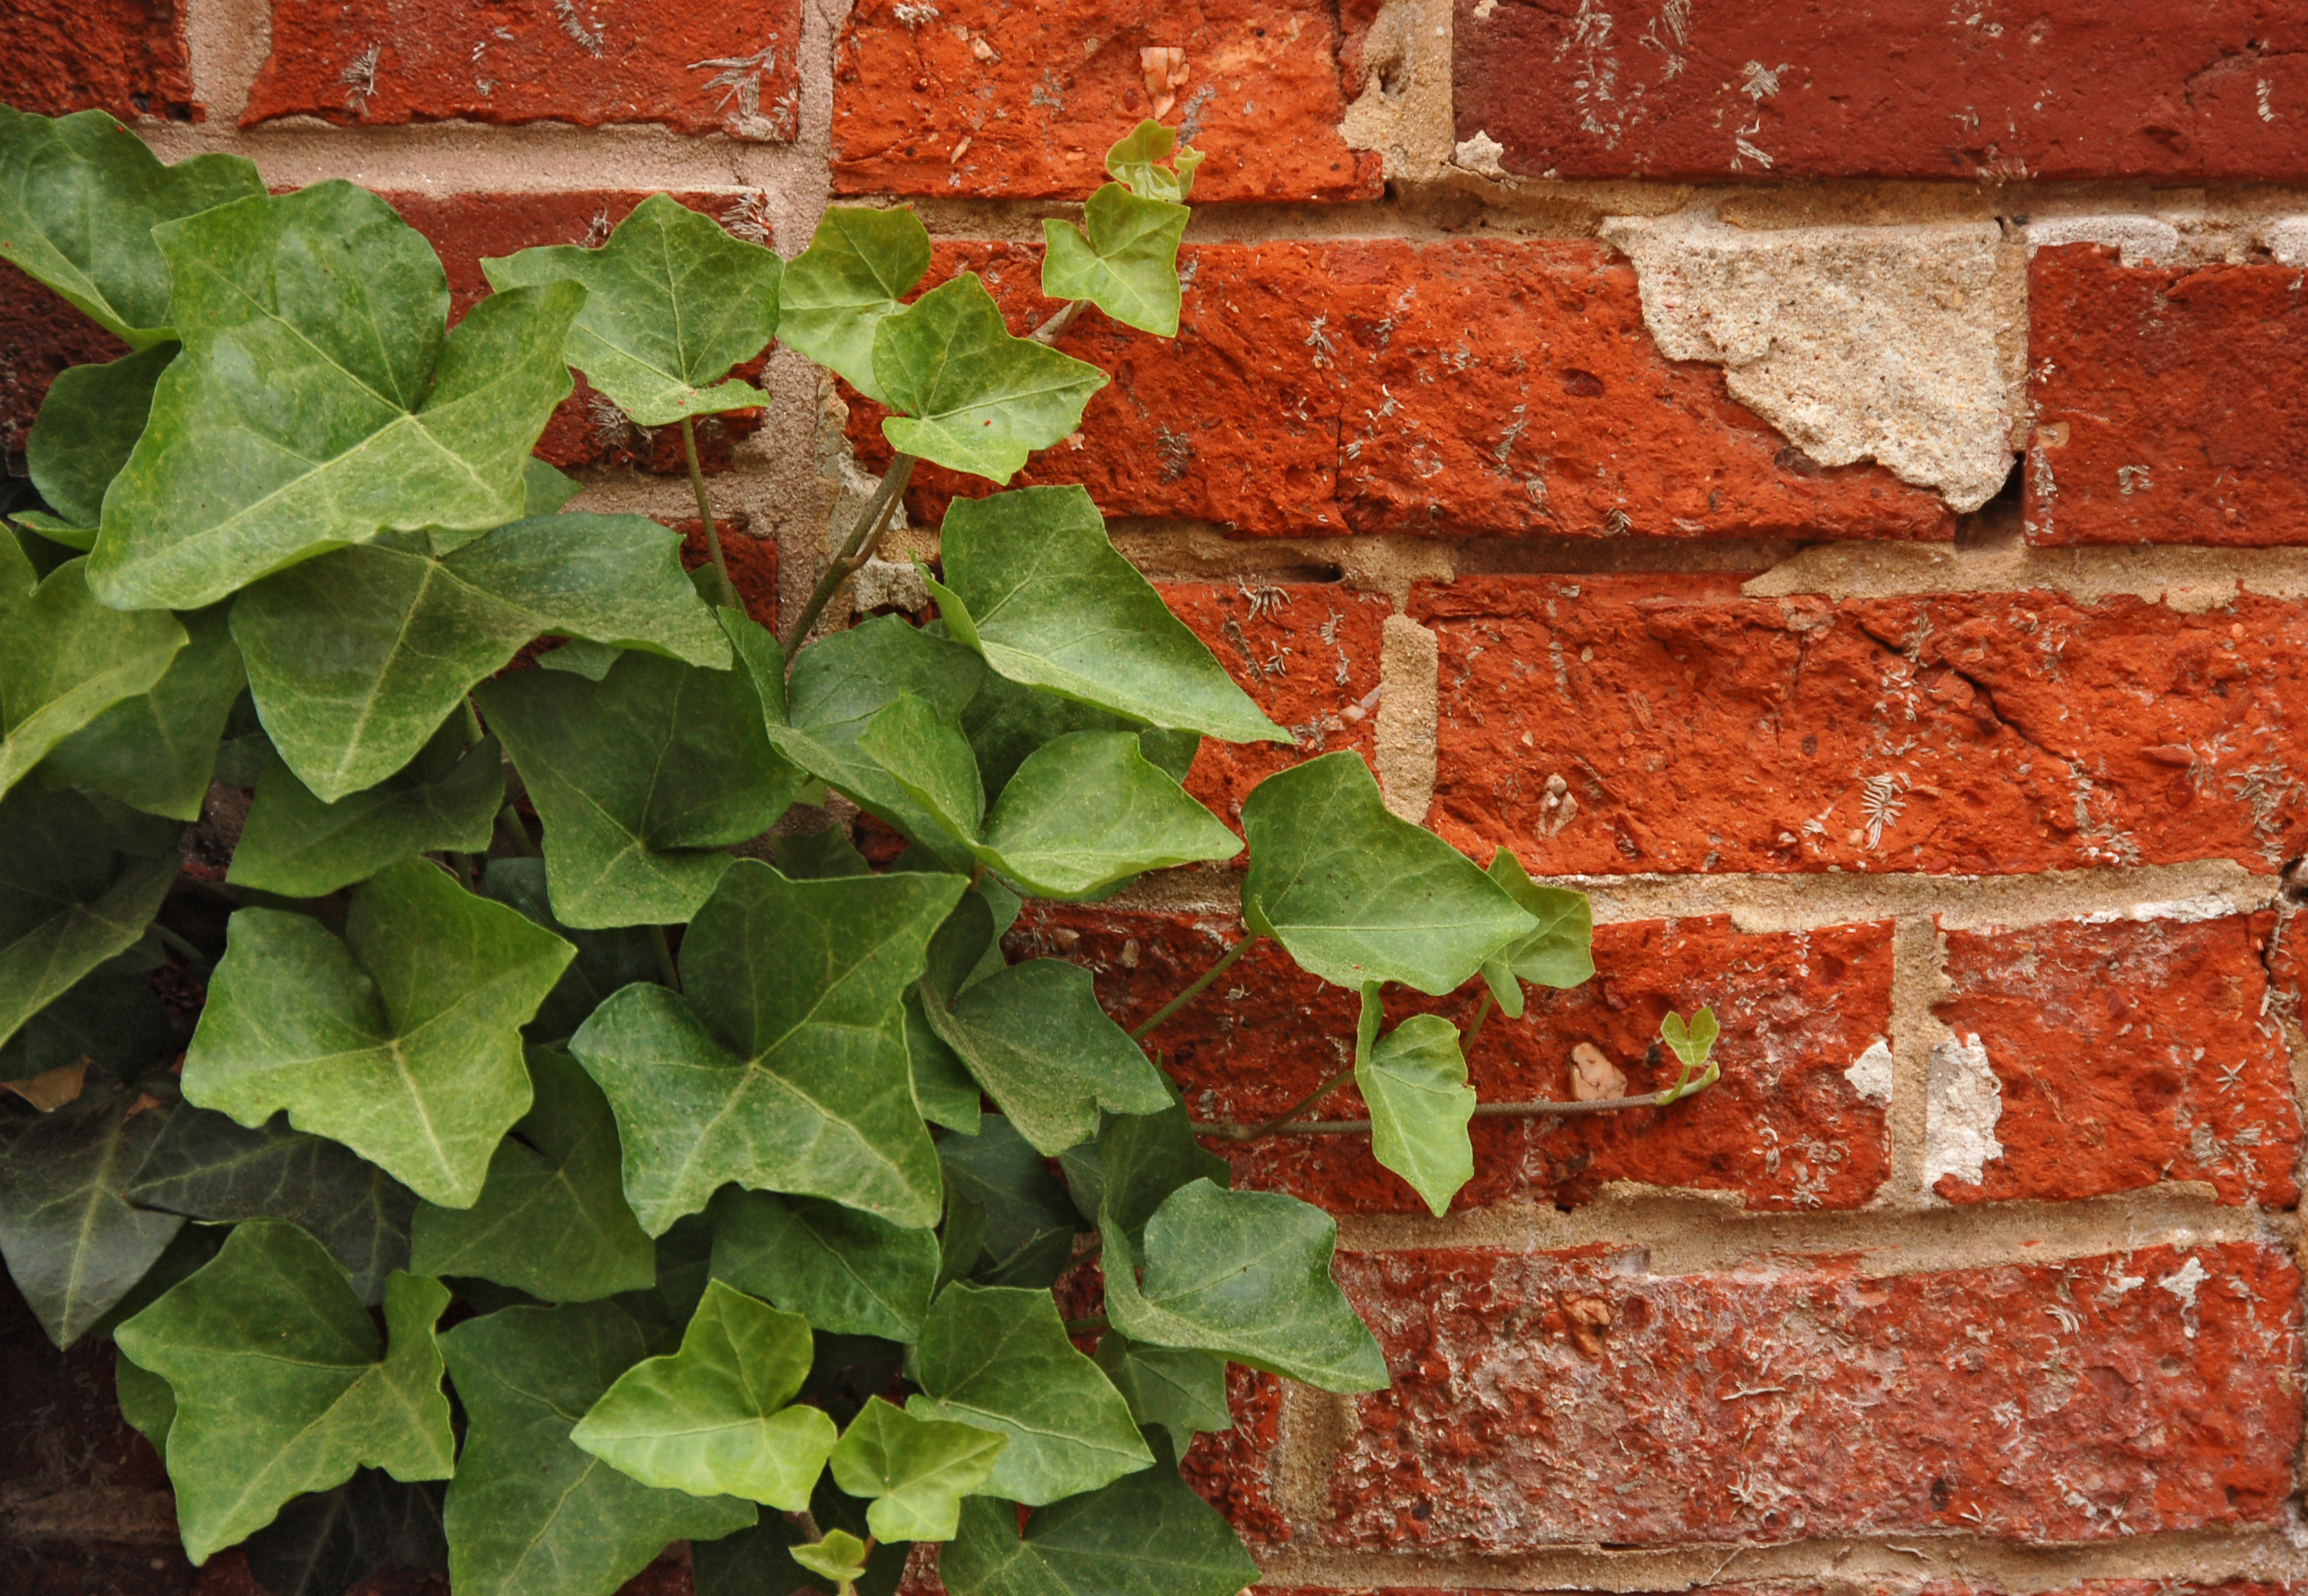 English Ivy growing on a red brick wall